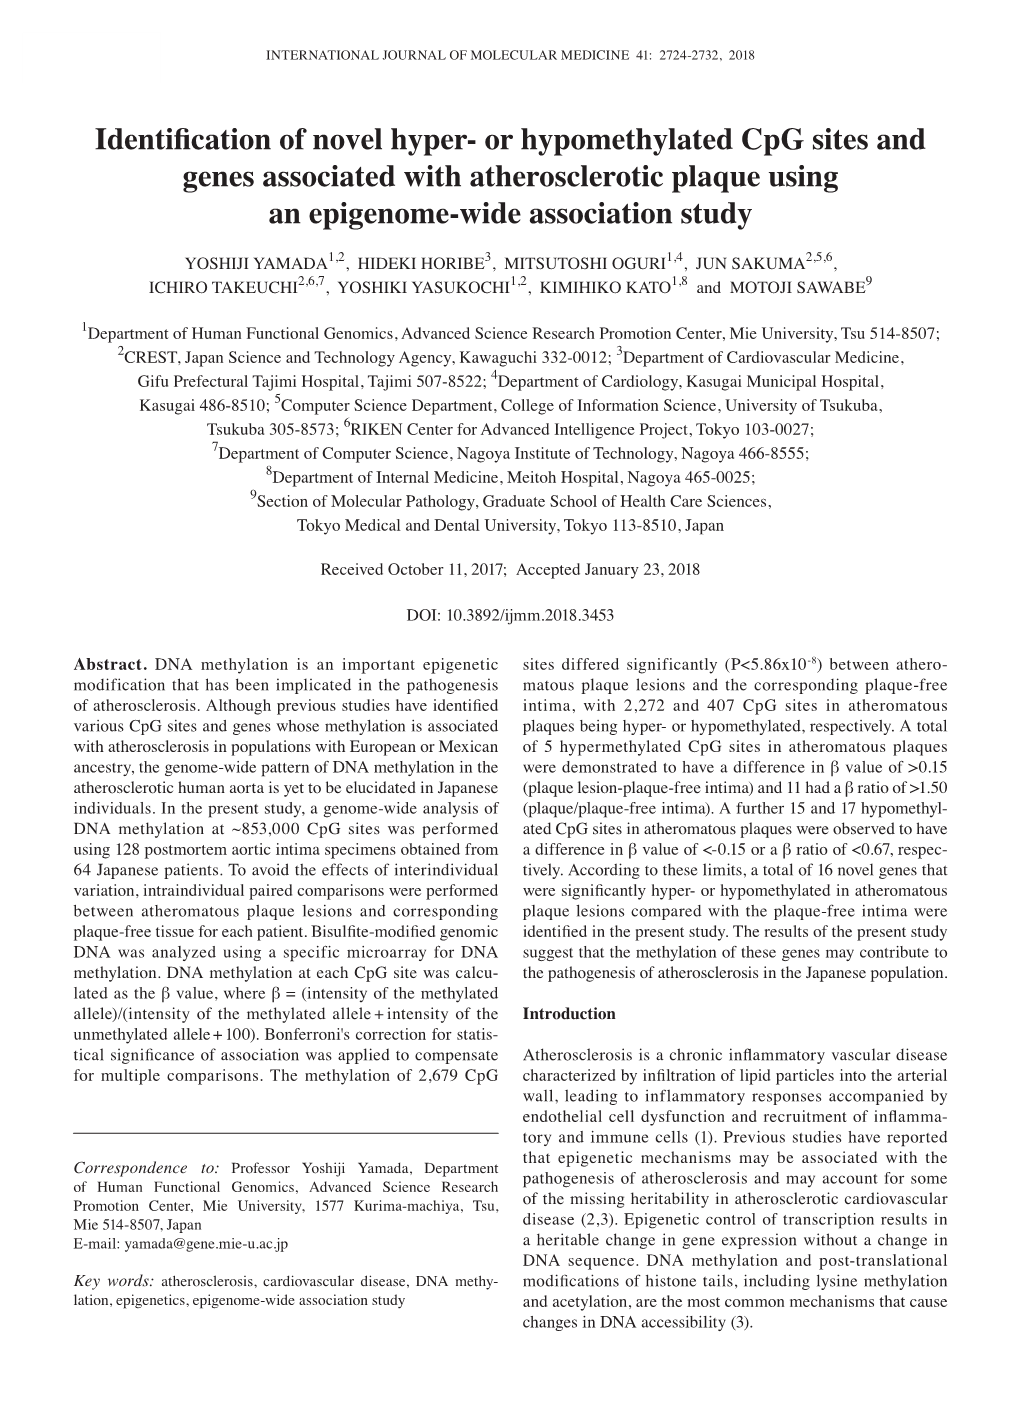 Or Hypomethylated Cpg Sites and Genes Associated with Atherosclerotic Plaque Using an Epigenome‑Wide Association Study